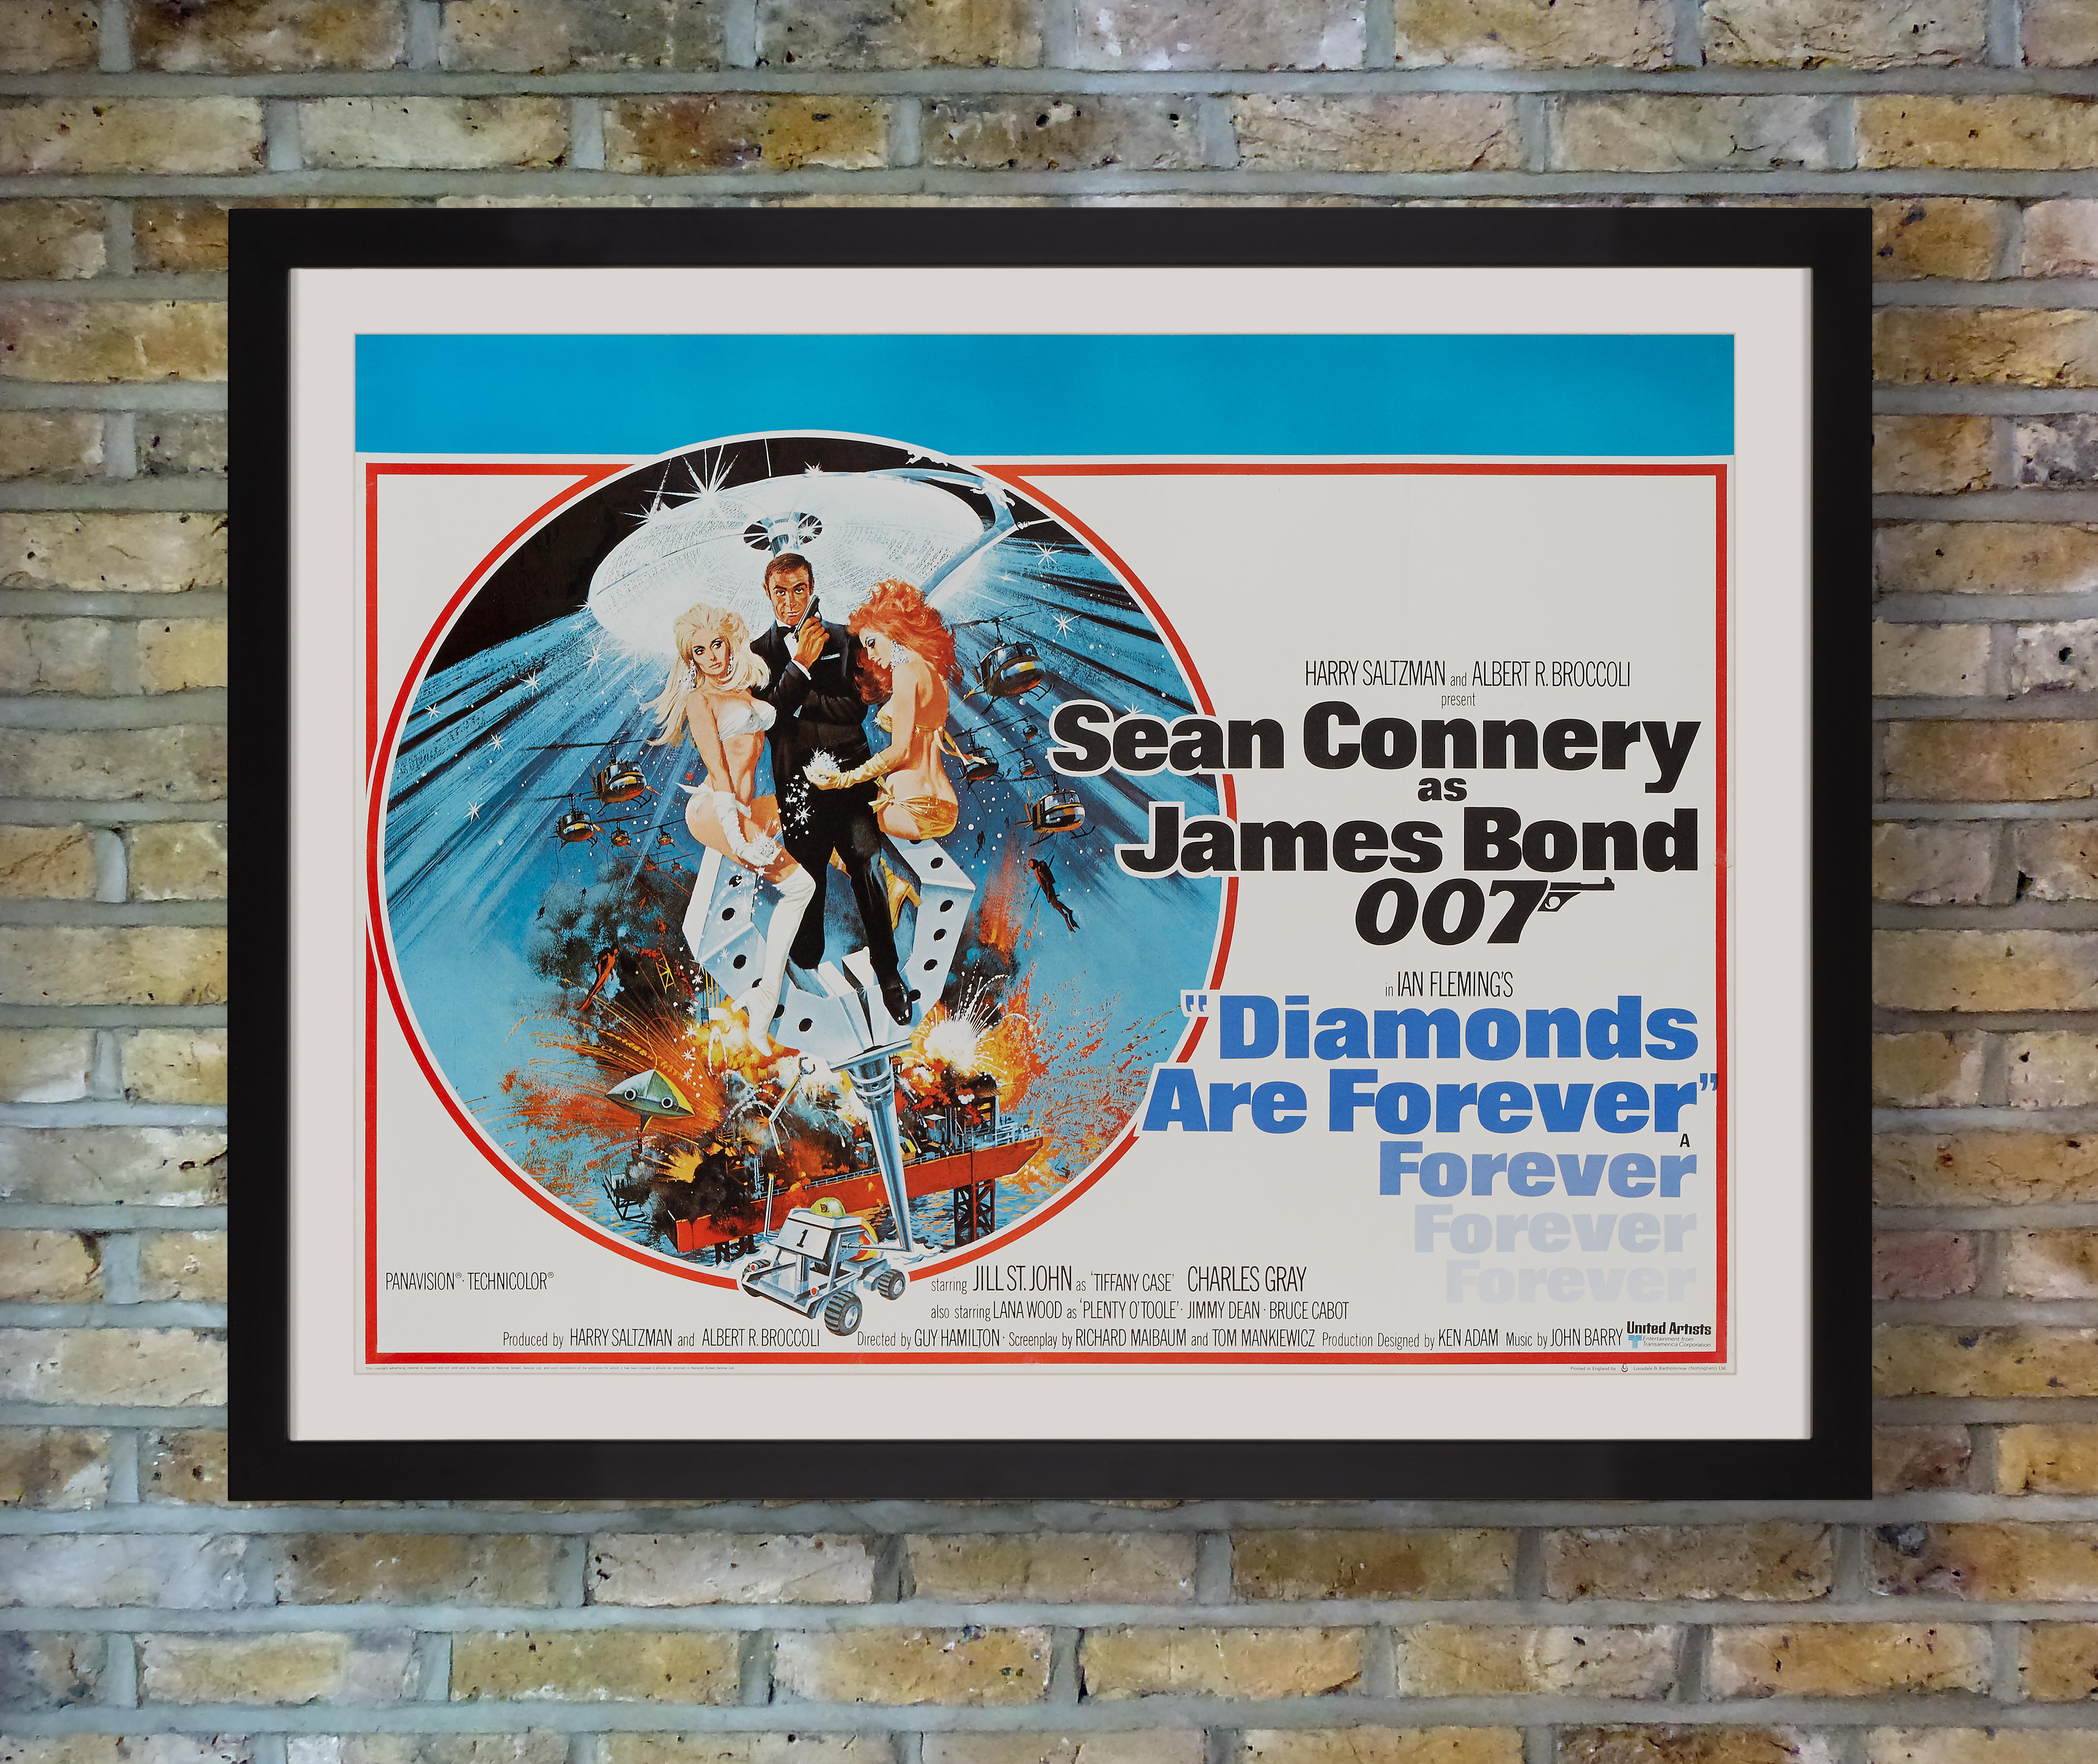 Sean Connery was paid a then record $1.25 million to return as James Bond for EON Production's Diamonds Are Forever, his sixth and final outing as Bond after declining the role in 1969s 'On Her Majesty's Secret Service.' A diamond smuggling